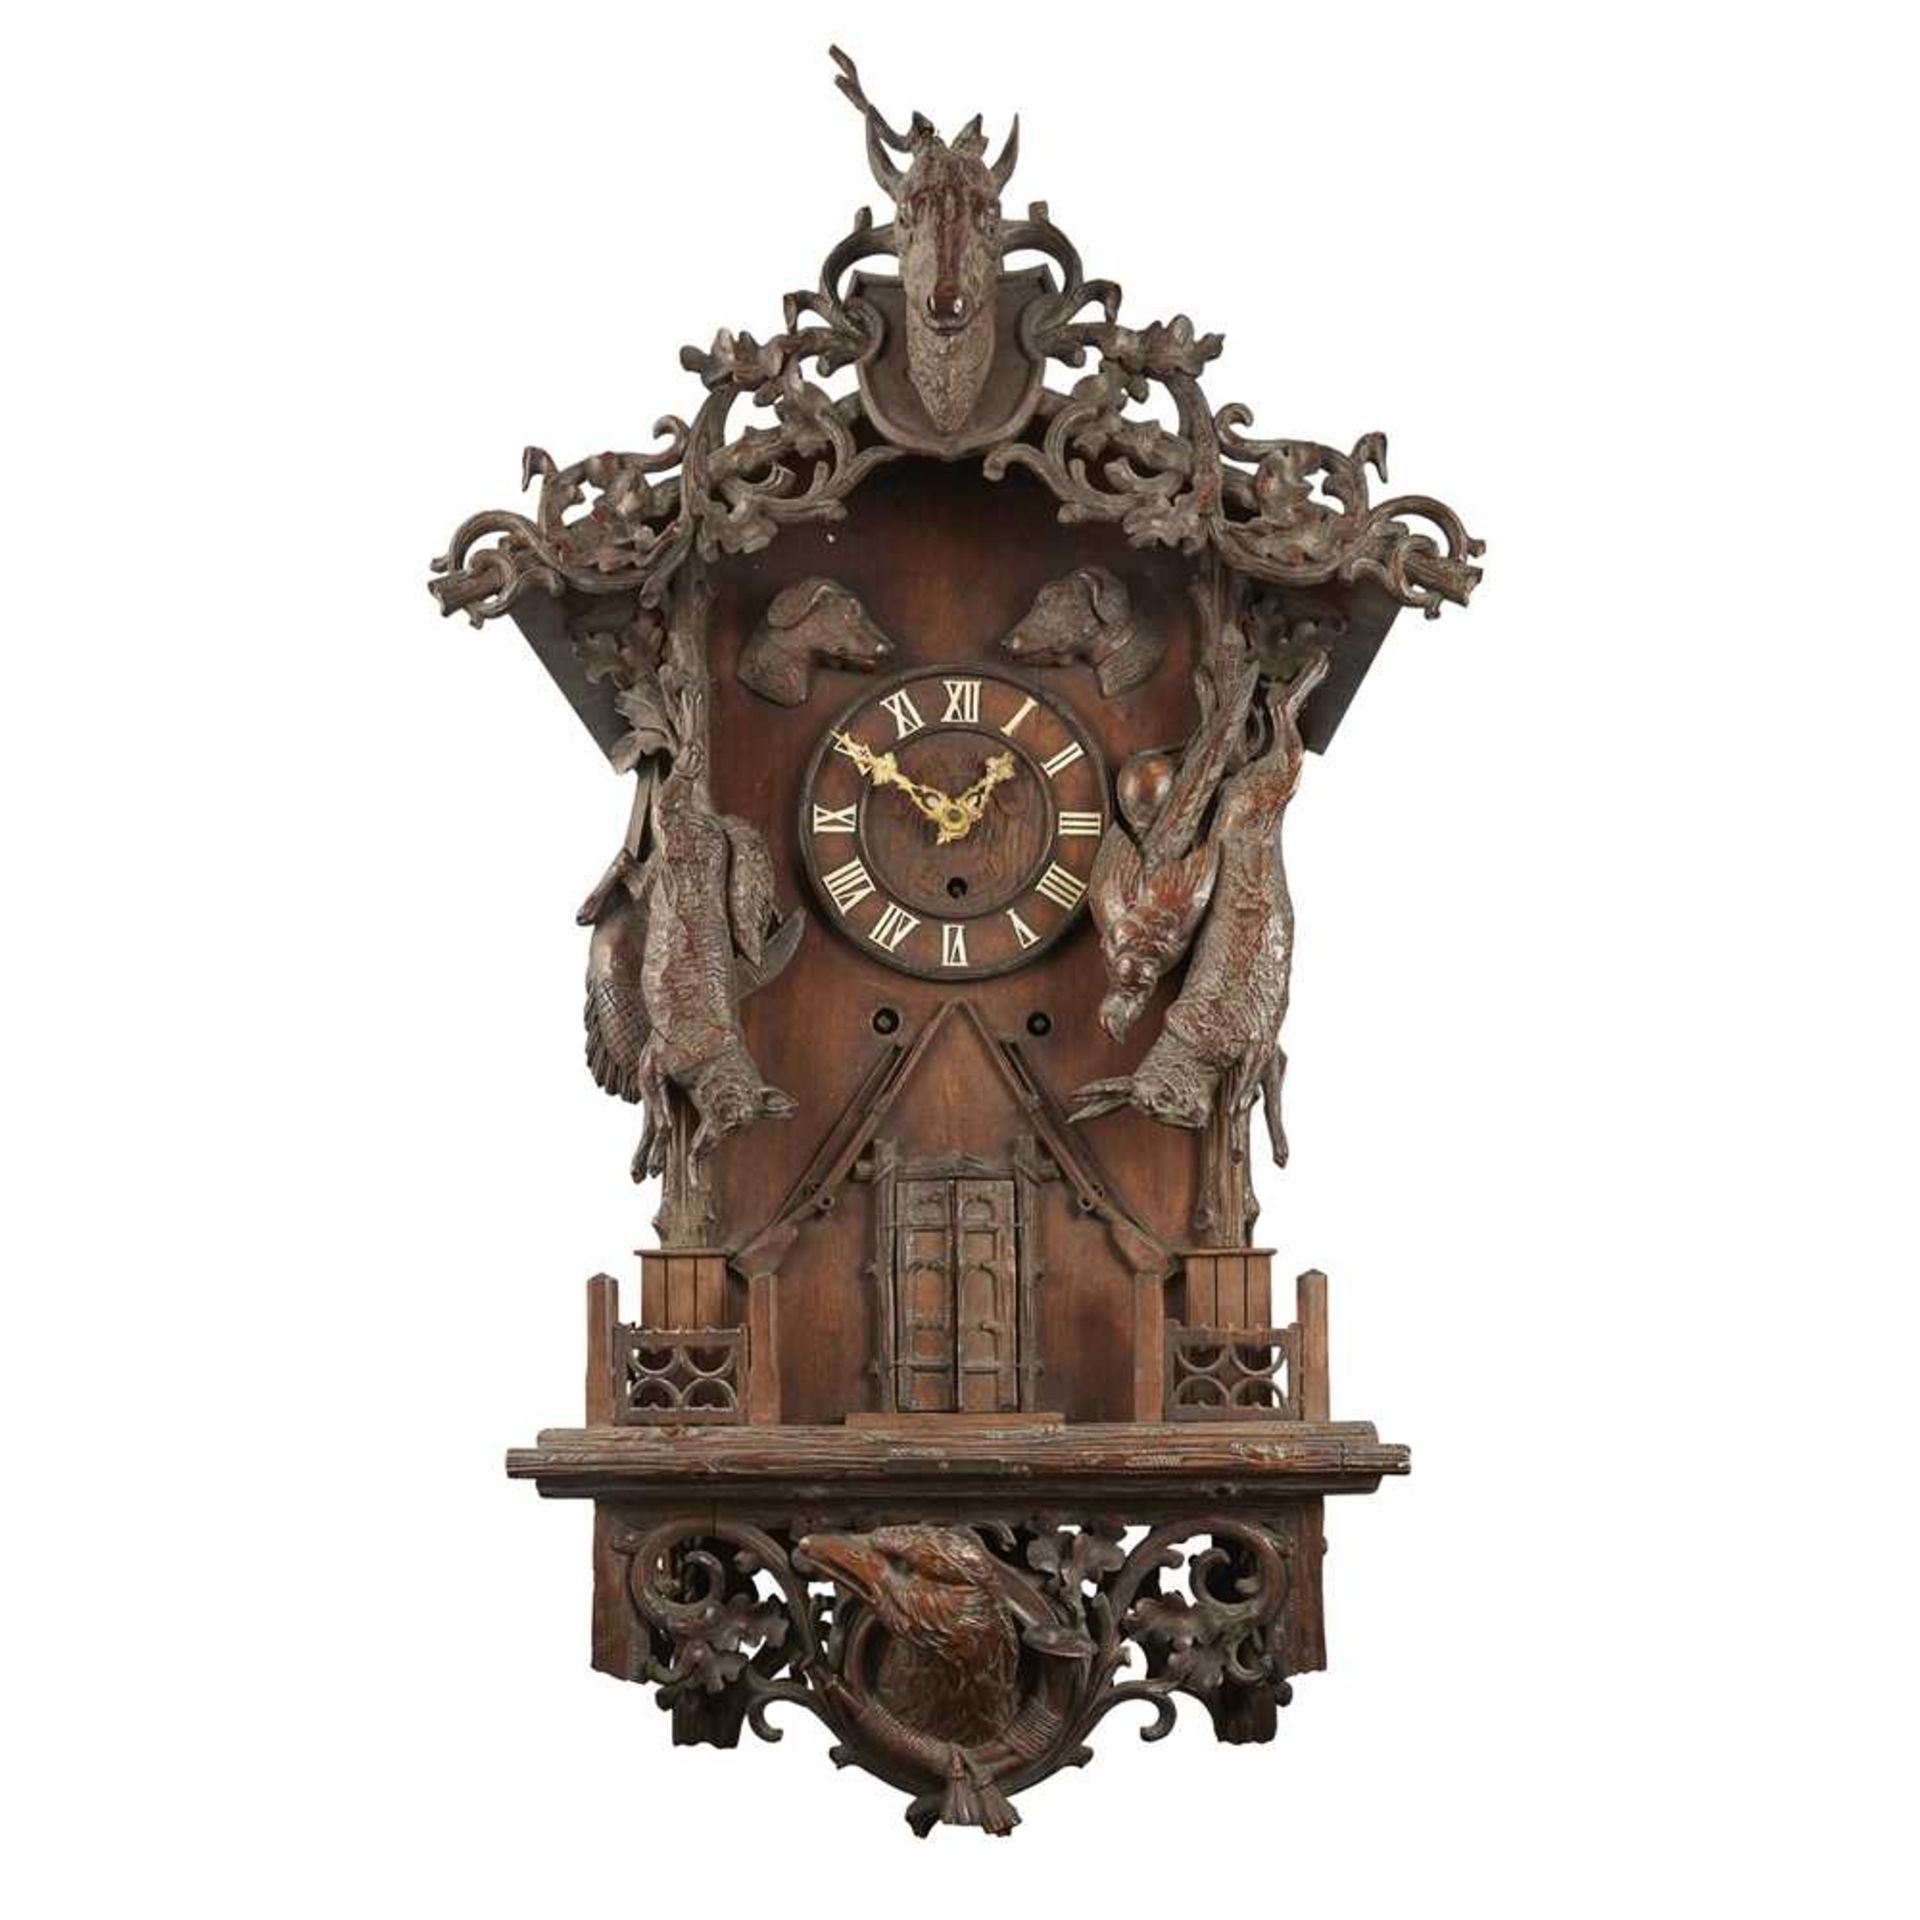 LARGE BLACK FOREST CARVED WALL CLOCK BY EMILIAN WEHRLE, RETAILED BY THE MORATH BROTHERS, LIVERPOOL